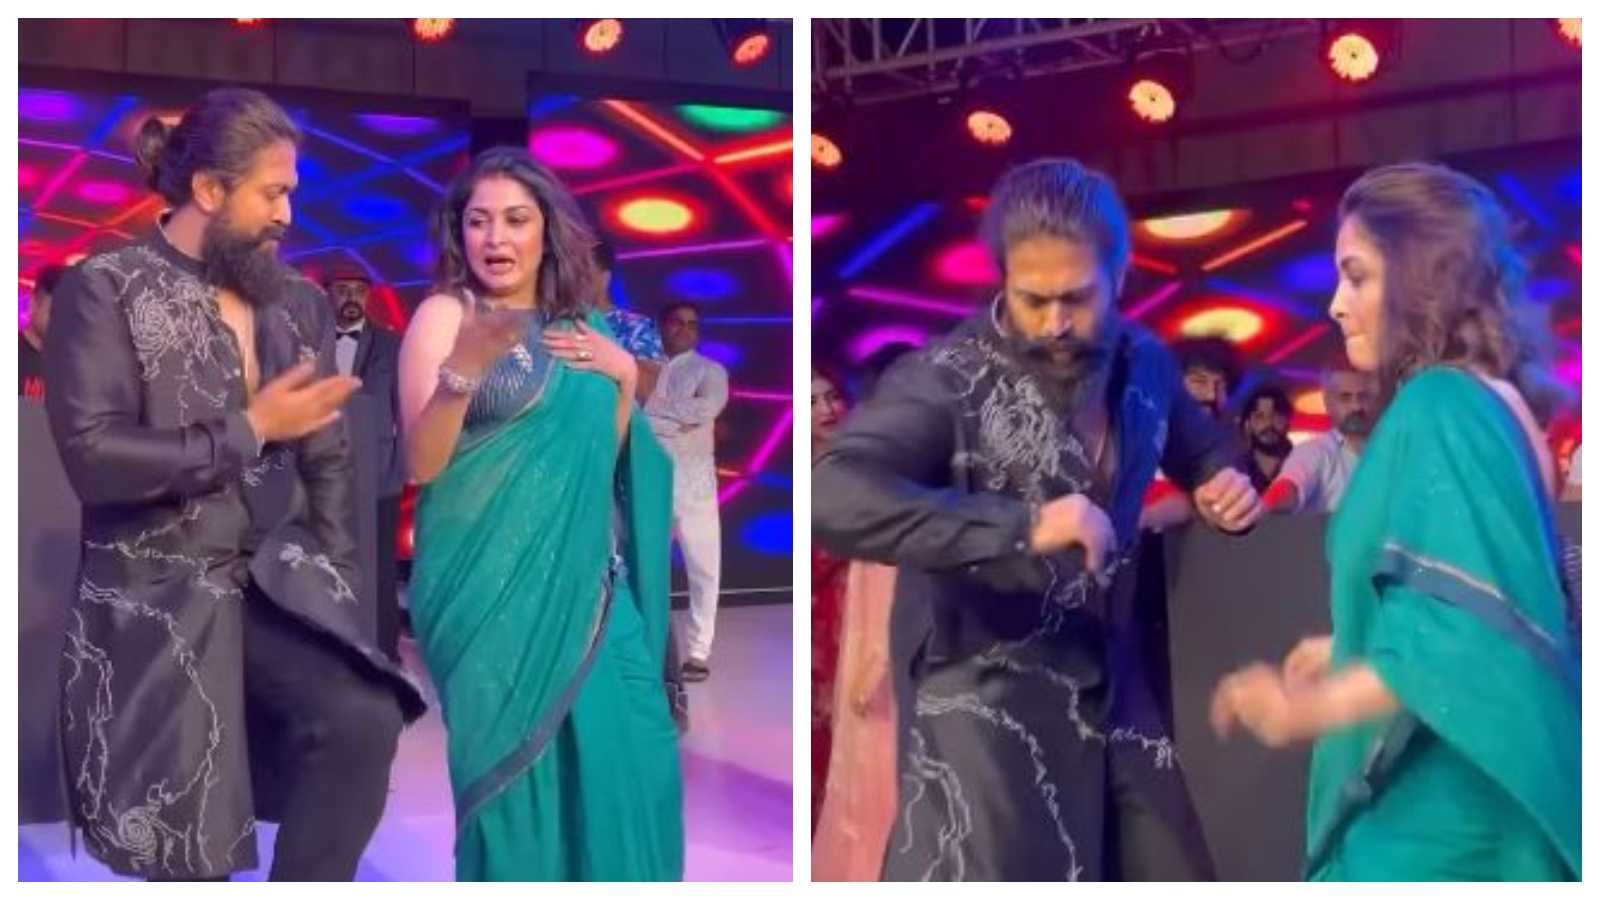 KGF star Yash grooves with Baahubali's Sivagami Devi at Abishek Ambareesh's wedding party